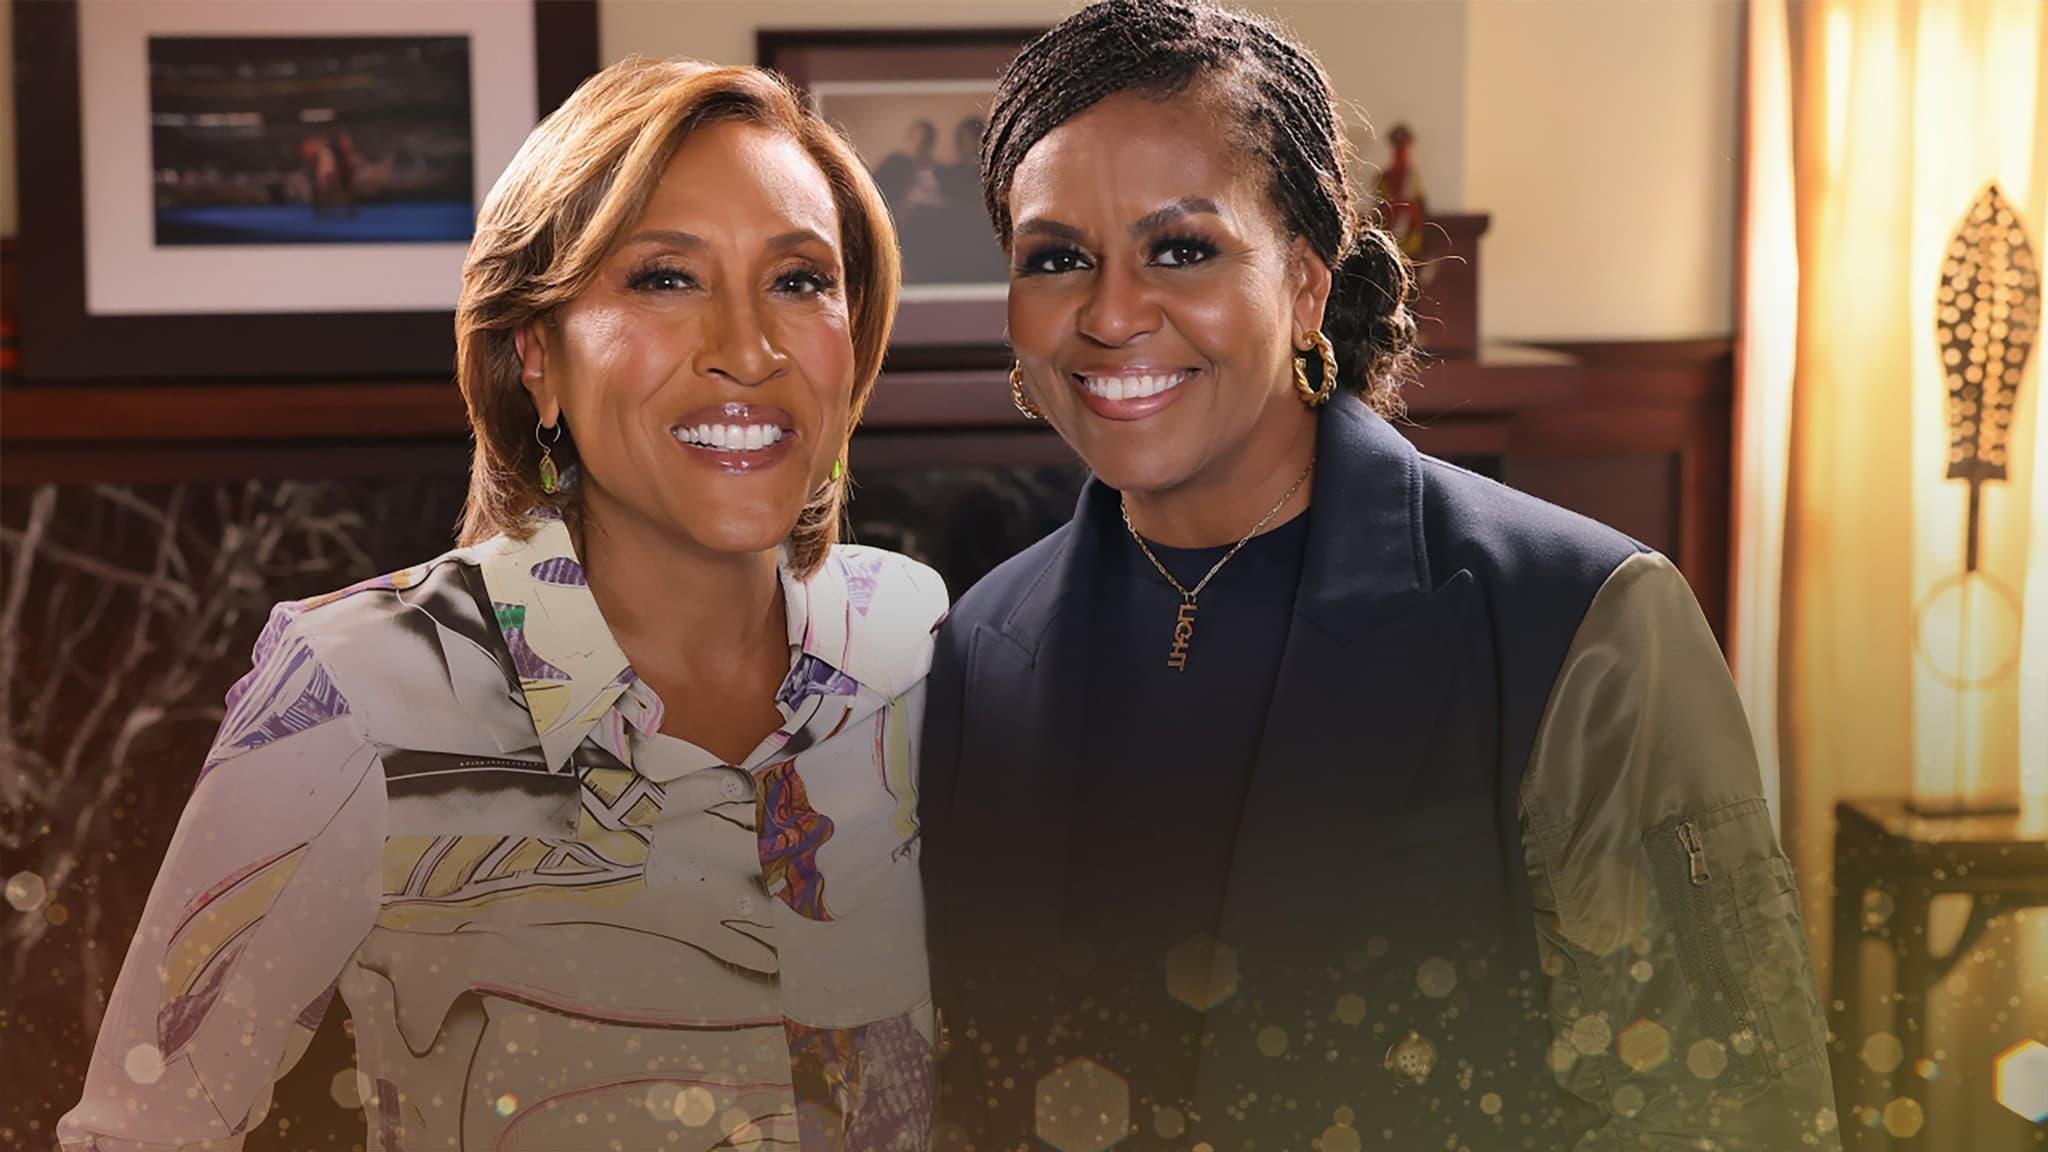 Michelle Obama: The Light We Carry, A Conversation with Robin Roberts backdrop